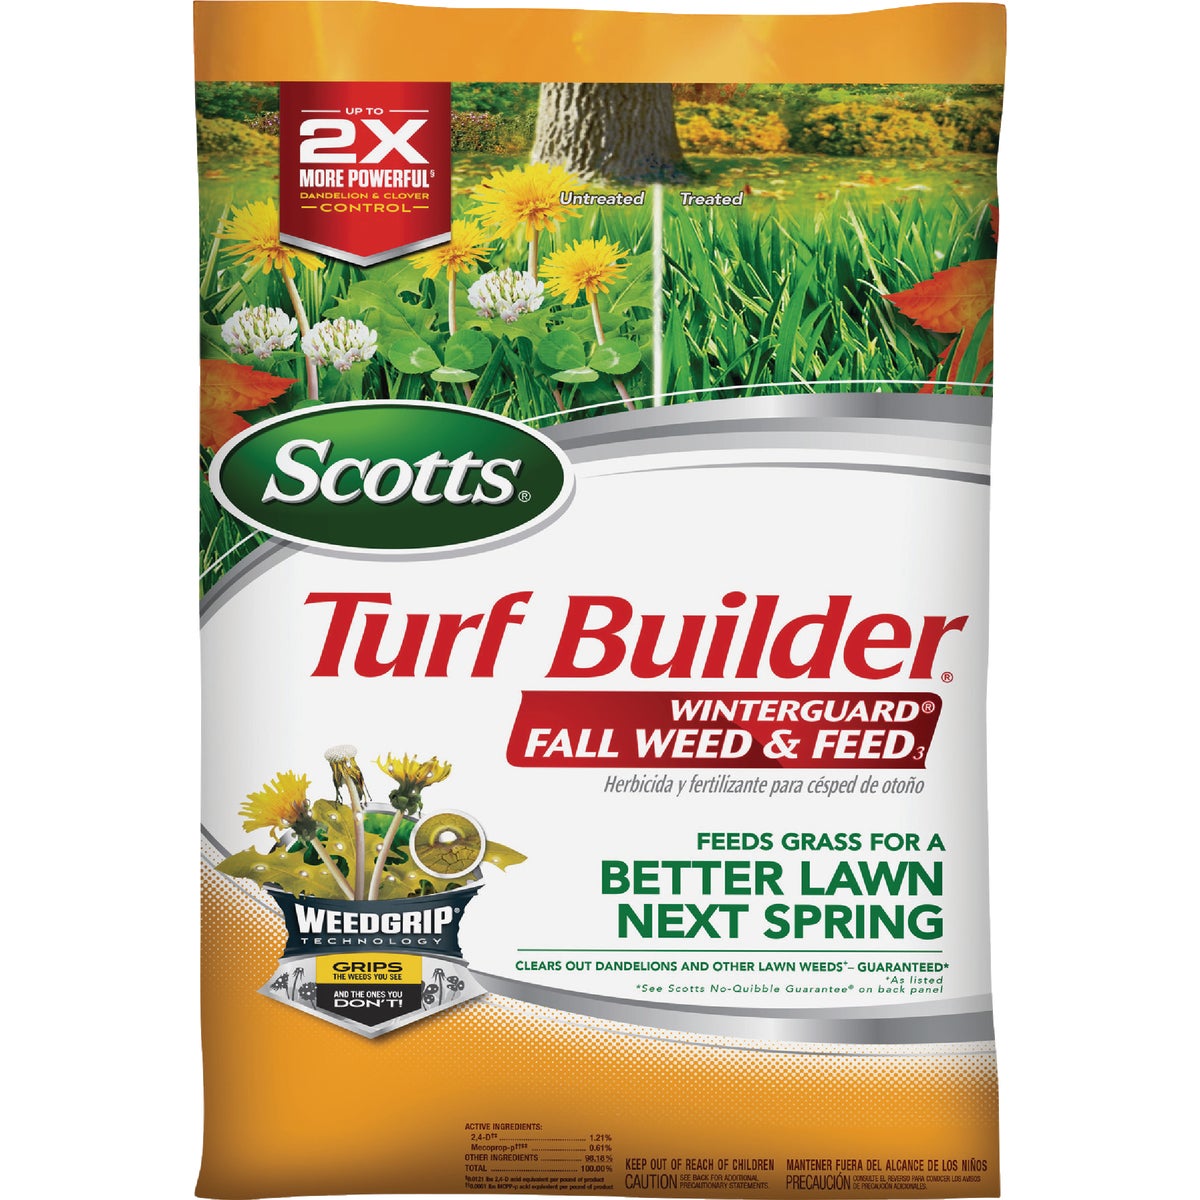 Scotts Turf Builder WinterGuard Weed & Feed 43.3 Lb. 12,000 Sq. Ft. Fall Weed Killer and Lawn Fertilizer